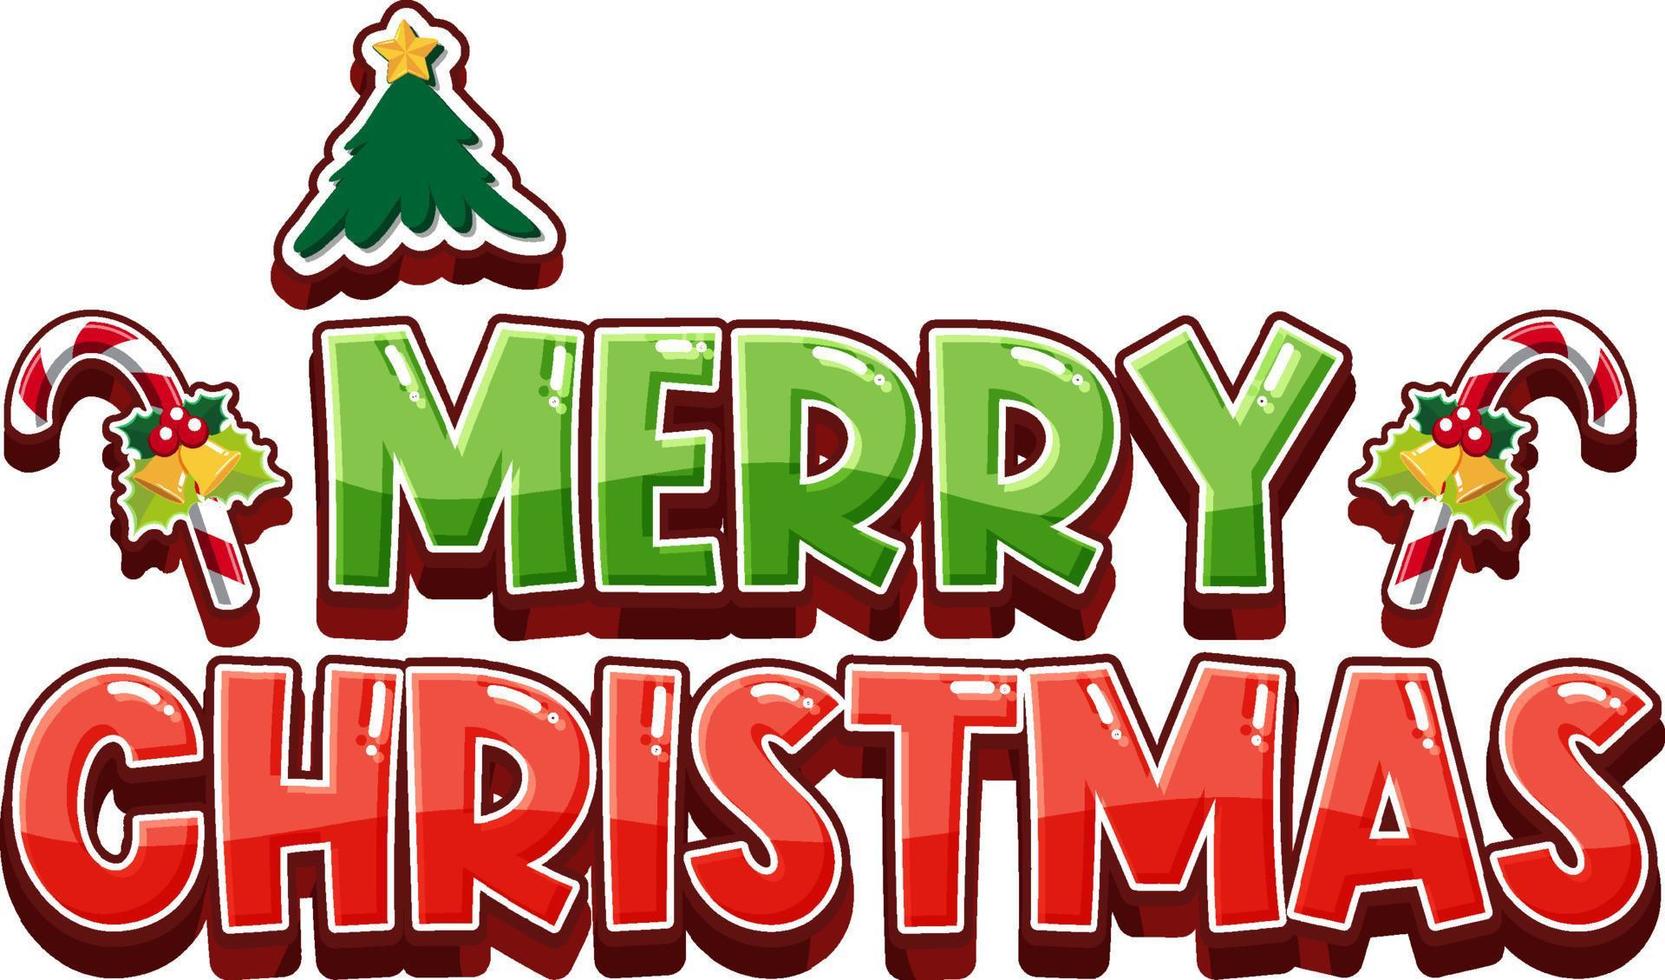 Merry Christmas banner with Christmas ornaments vector